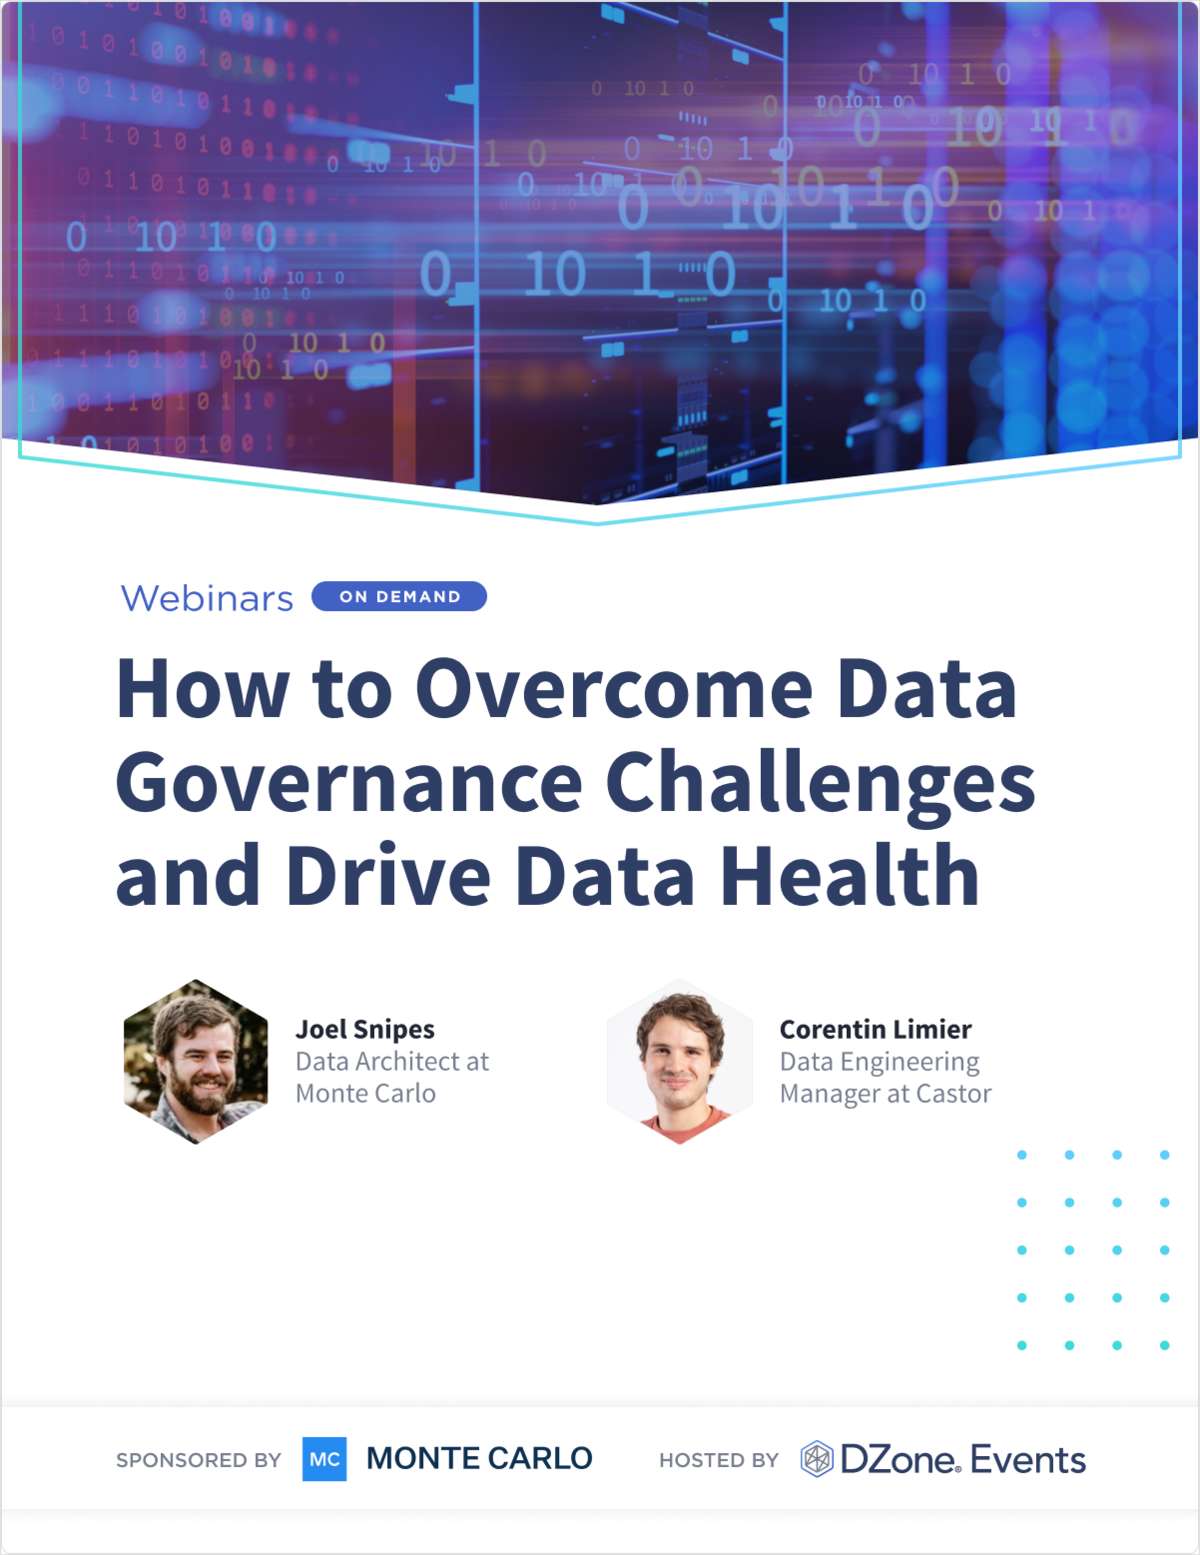 How to Overcome Data Governance Challenges and Drive Data Health